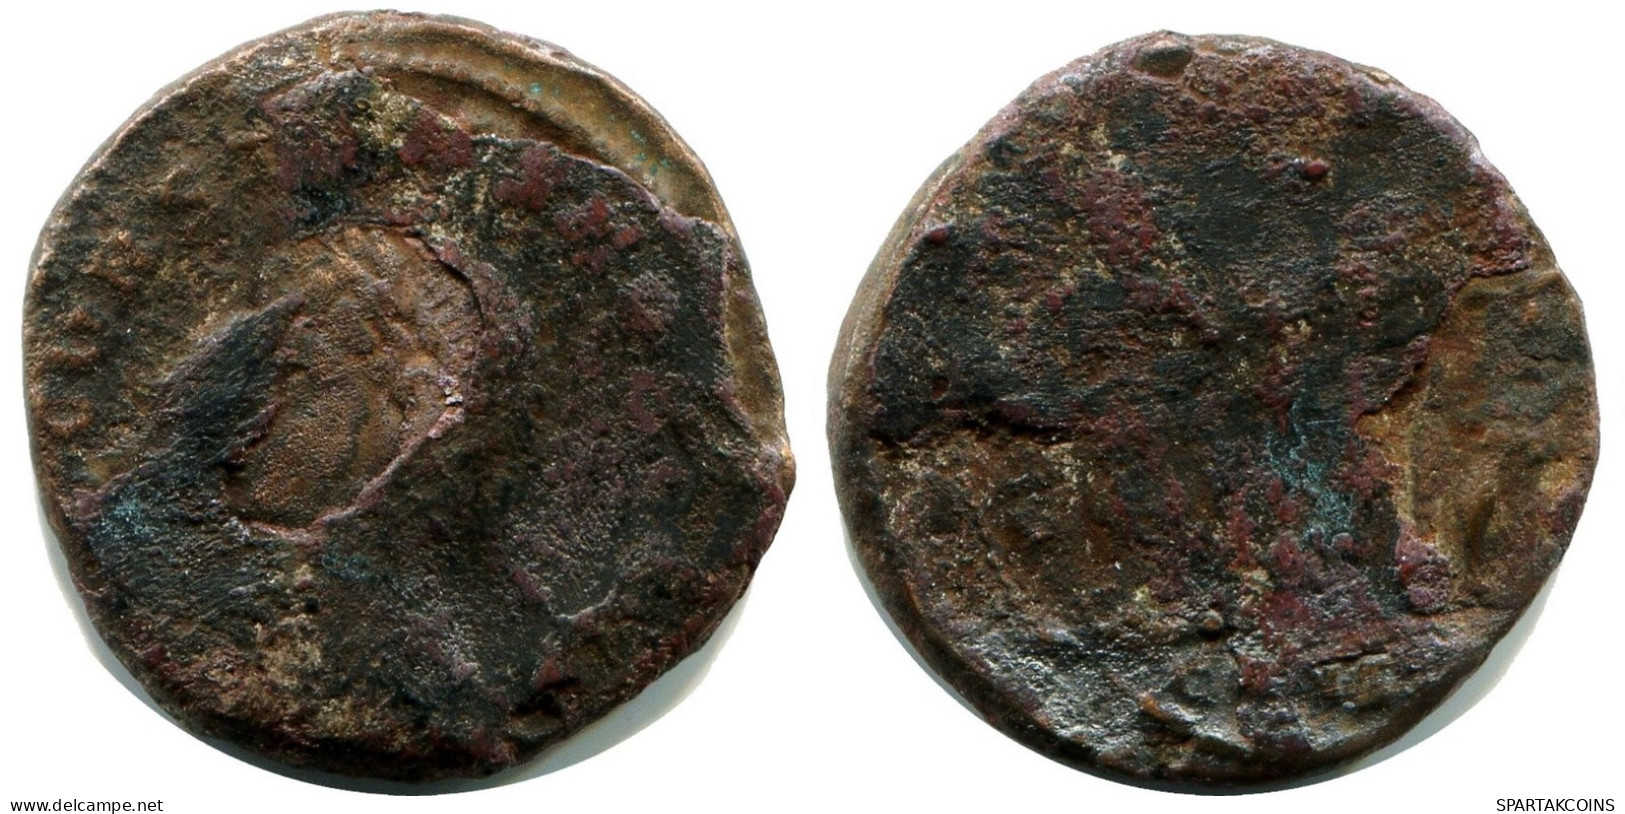 CONSTANS MINTED IN CONSTANTINOPLE FOUND IN IHNASYAH HOARD EGYPT #ANC11953.14.F.A - The Christian Empire (307 AD To 363 AD)